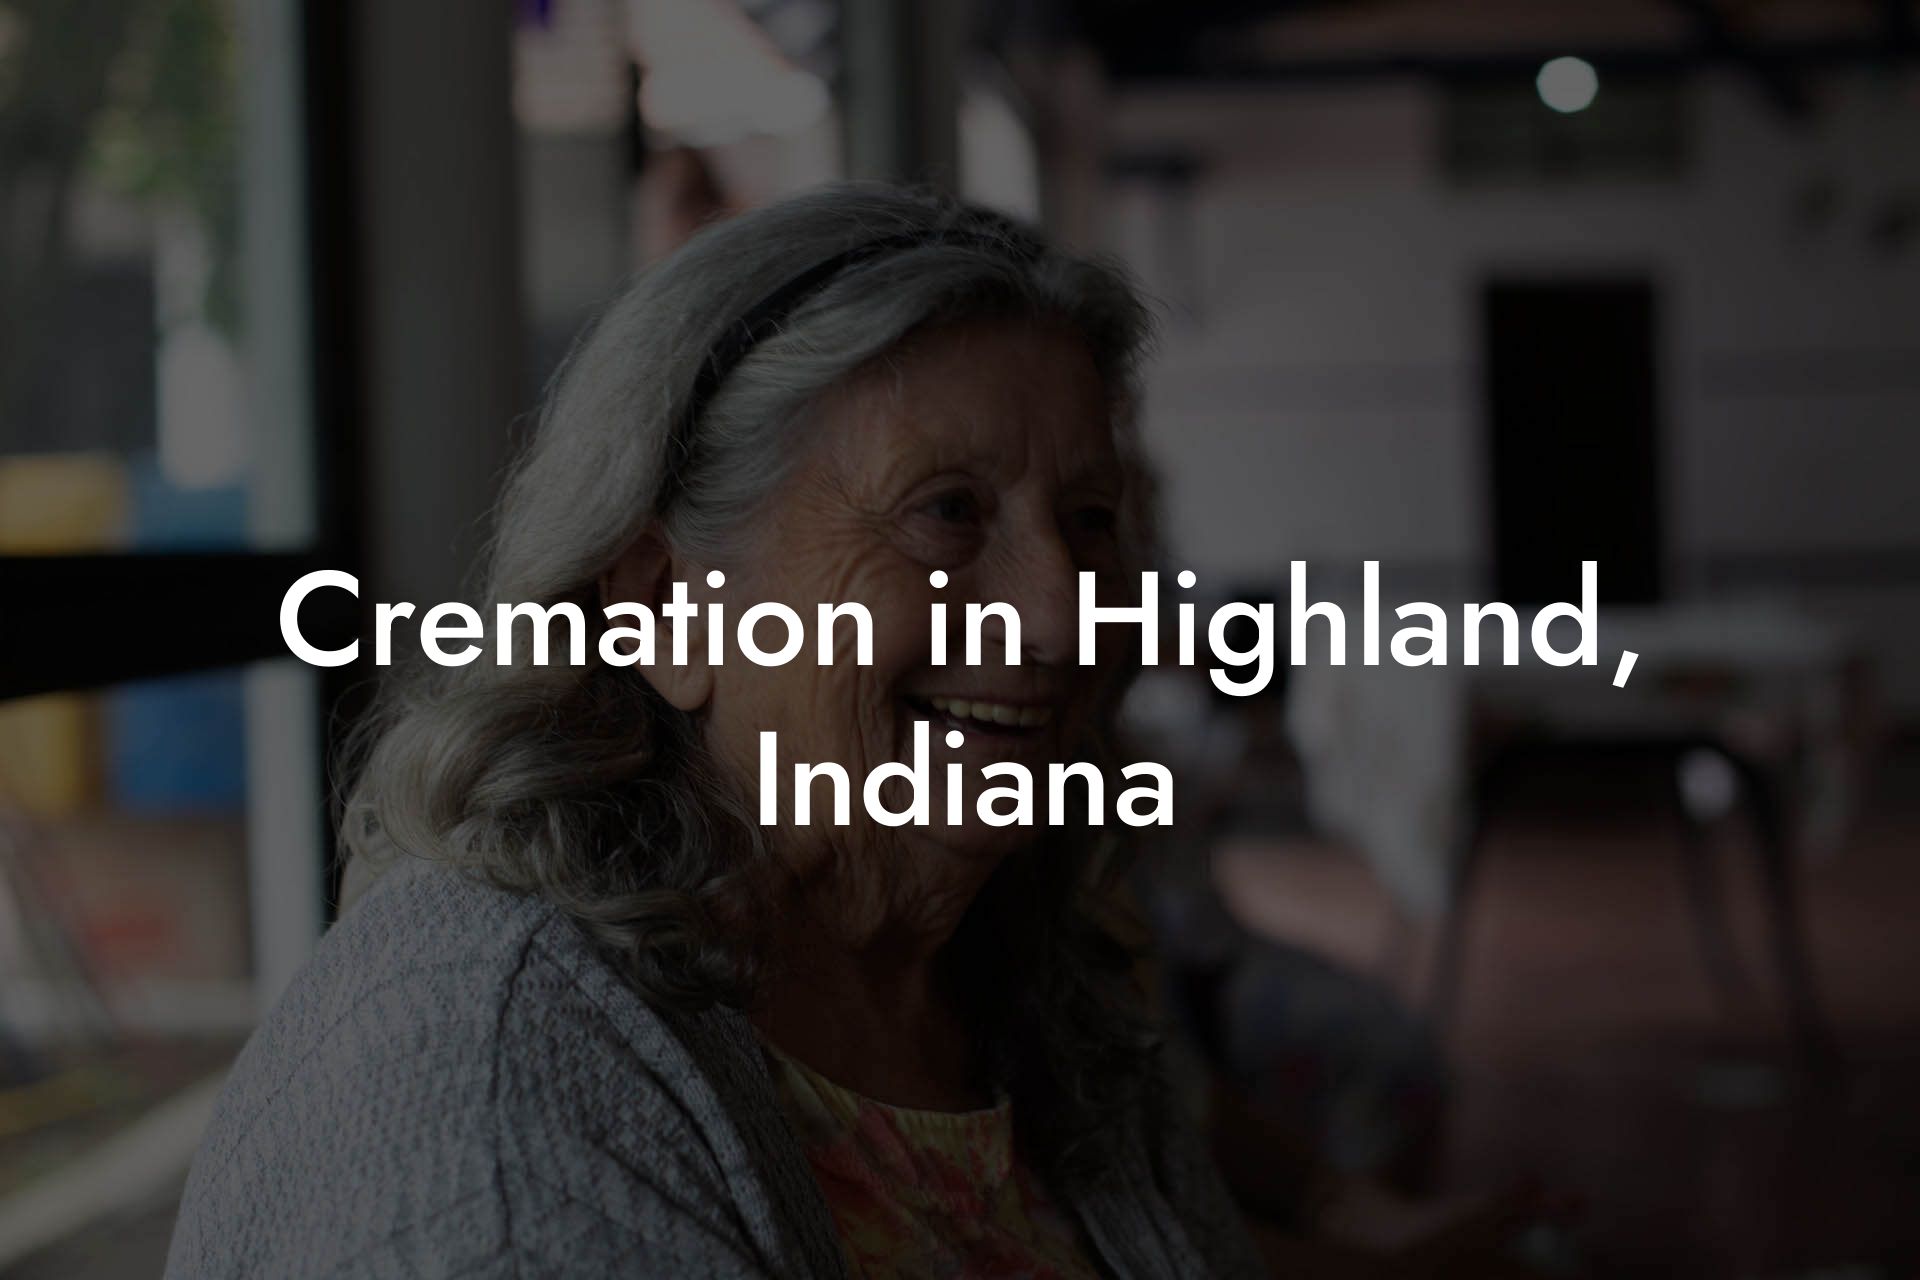 Cremation in Highland, Indiana